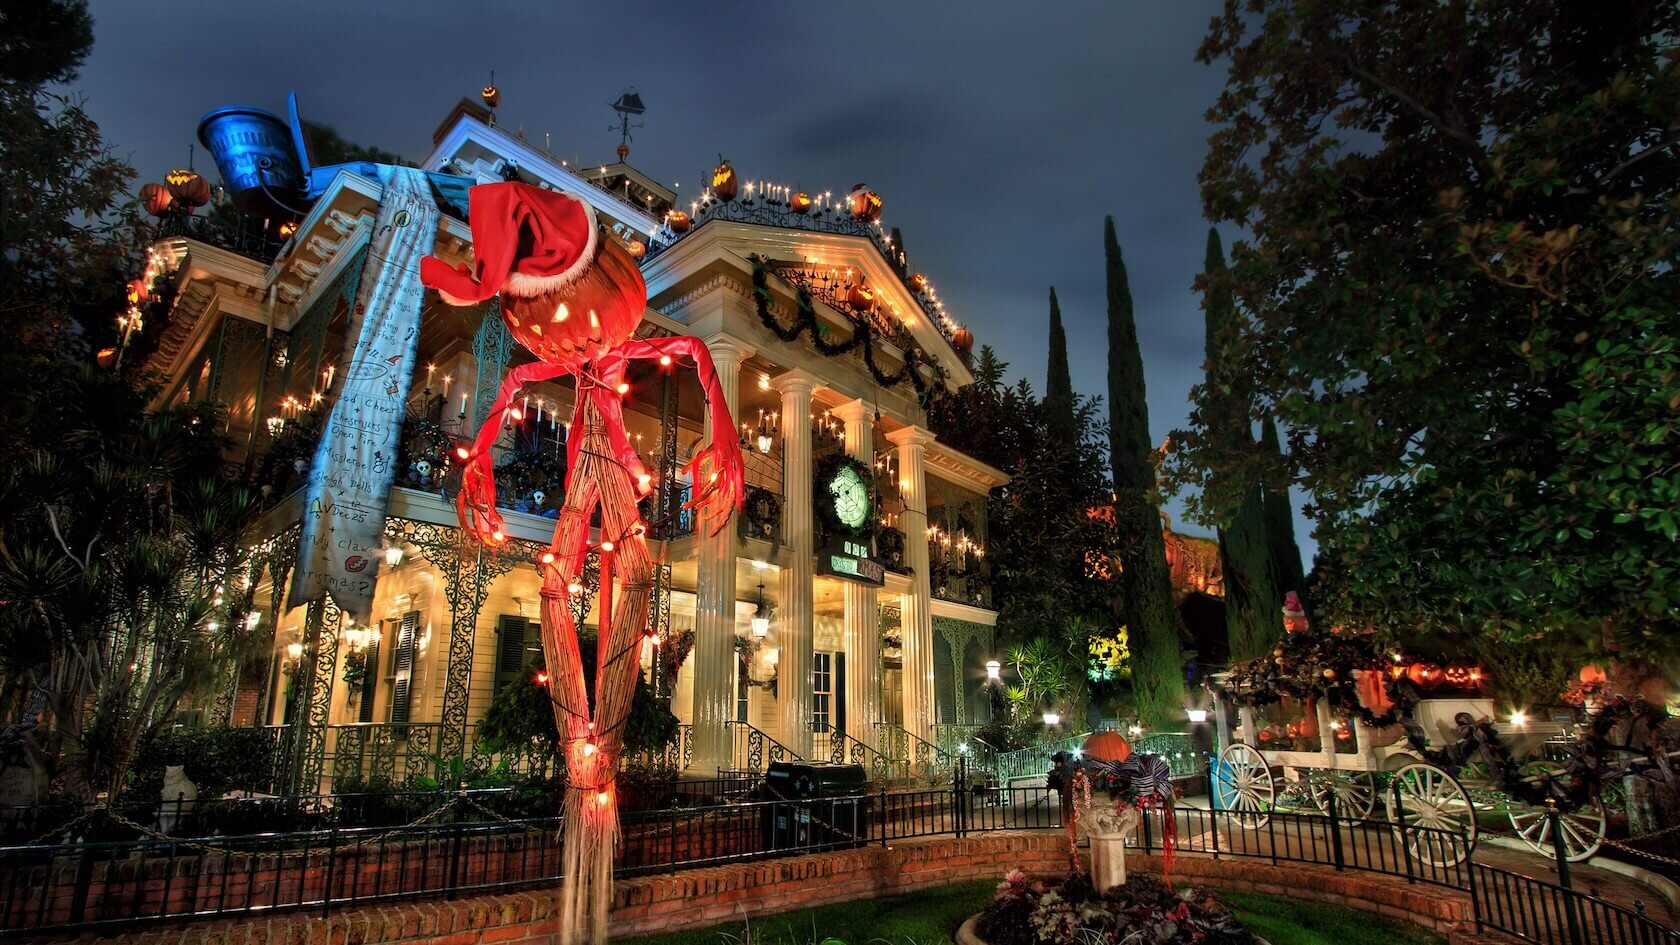 The Haunted Mansion Holiday's 20th Anniversary — The Disney Classics